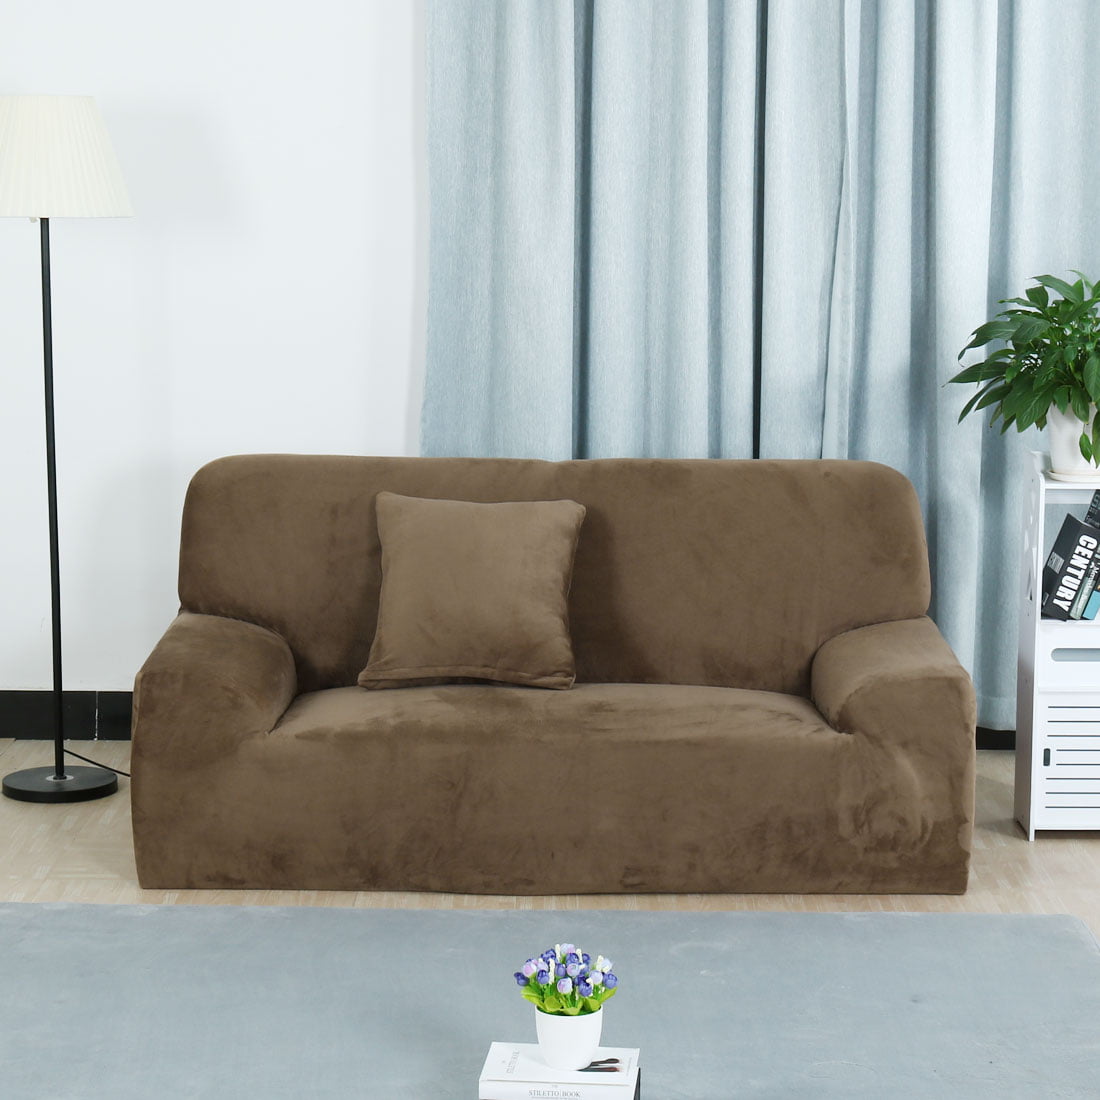 Details about   Slipcovers Sofa Tight Wrap Stretch Couch Covers Fitted Seat Furniture Protect 